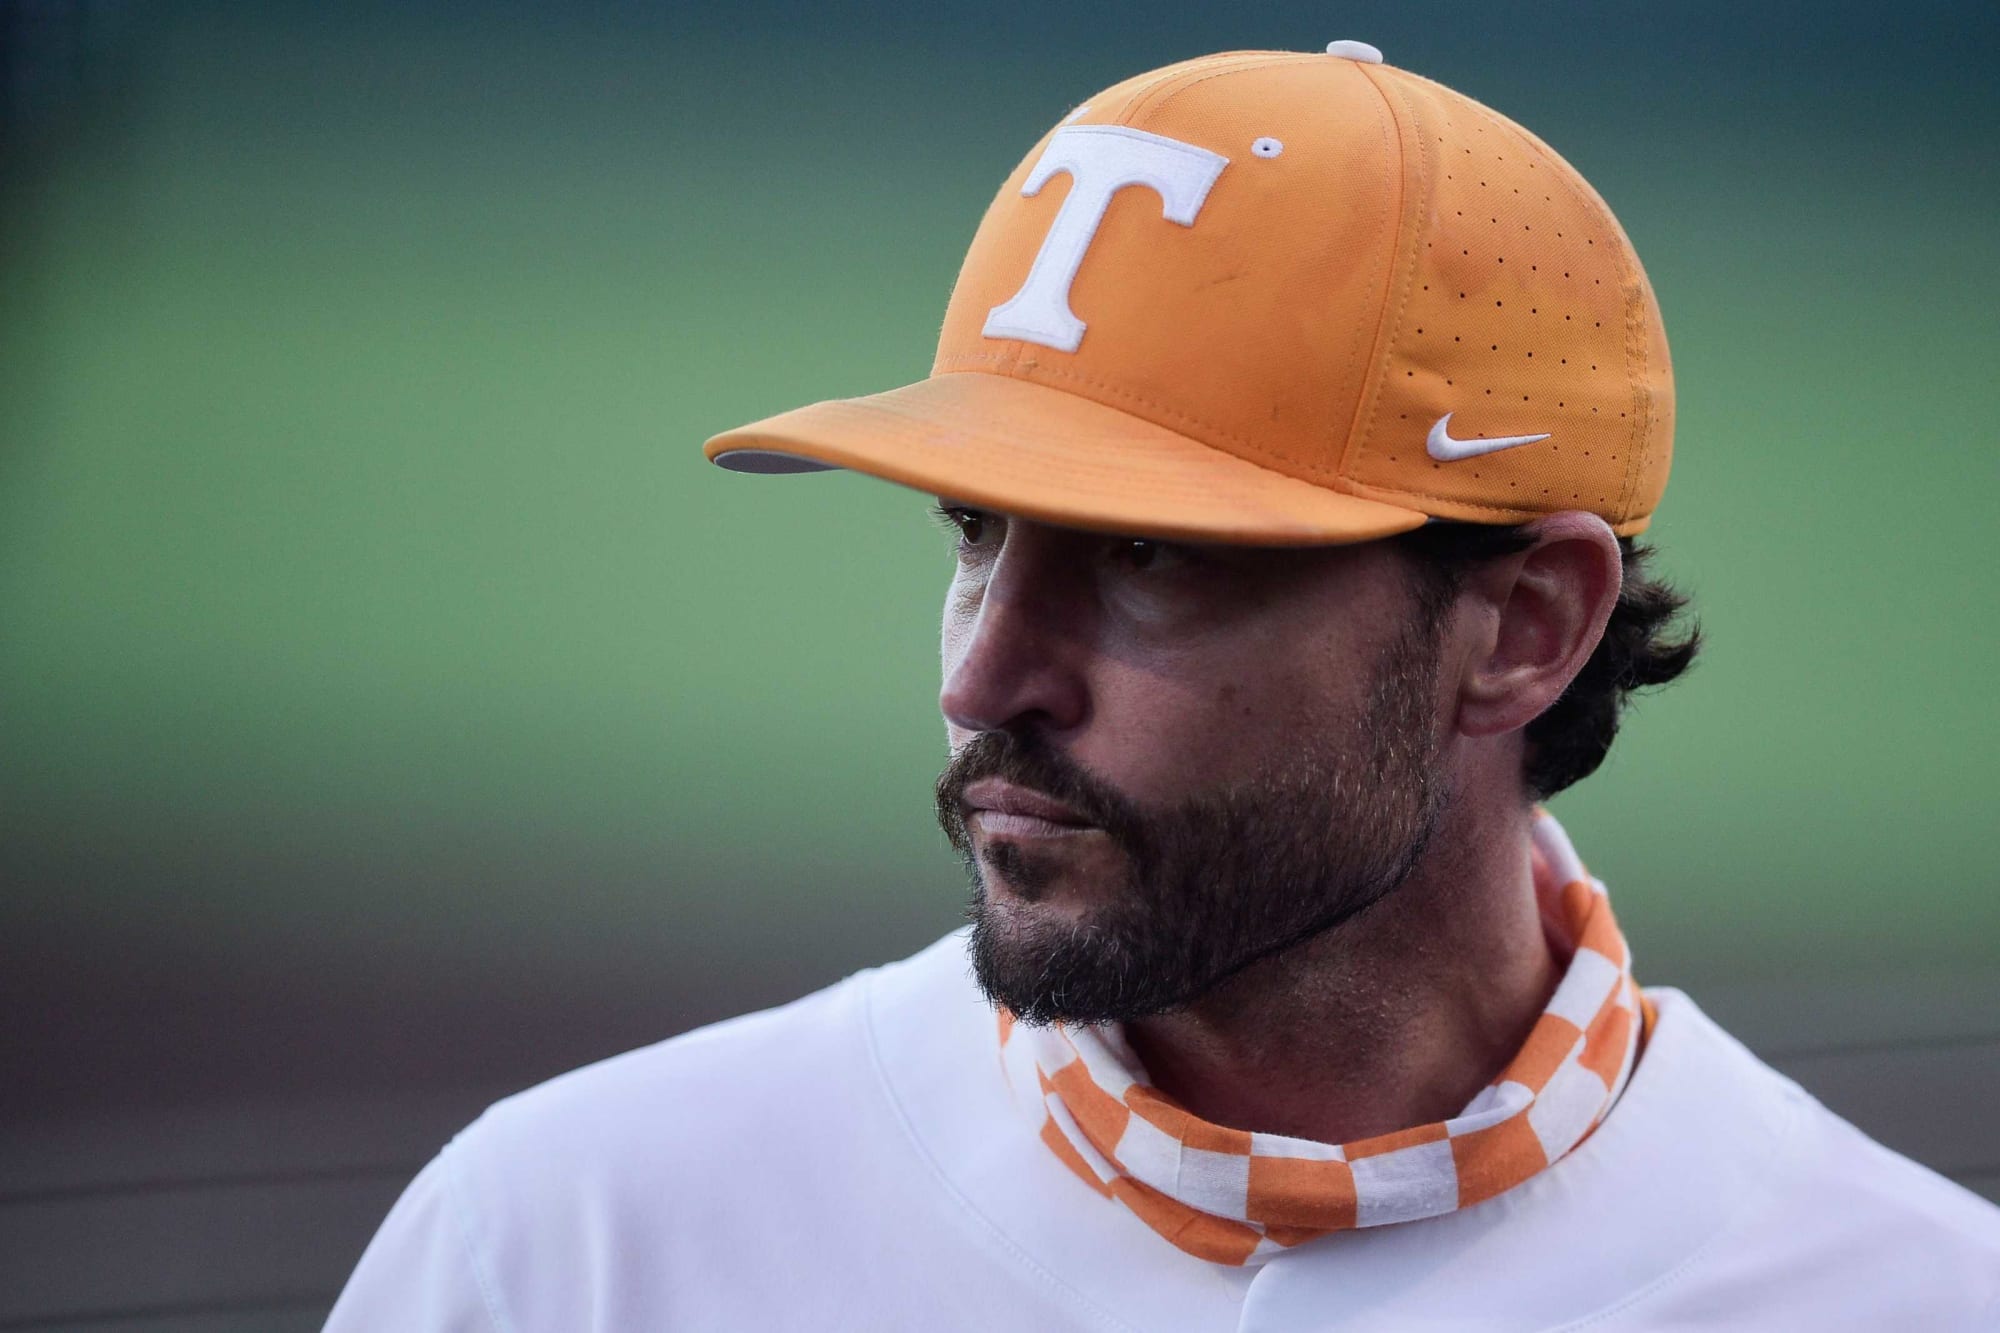 Tennessee baseball: Coach of the year shows SEC robbed Vols coach